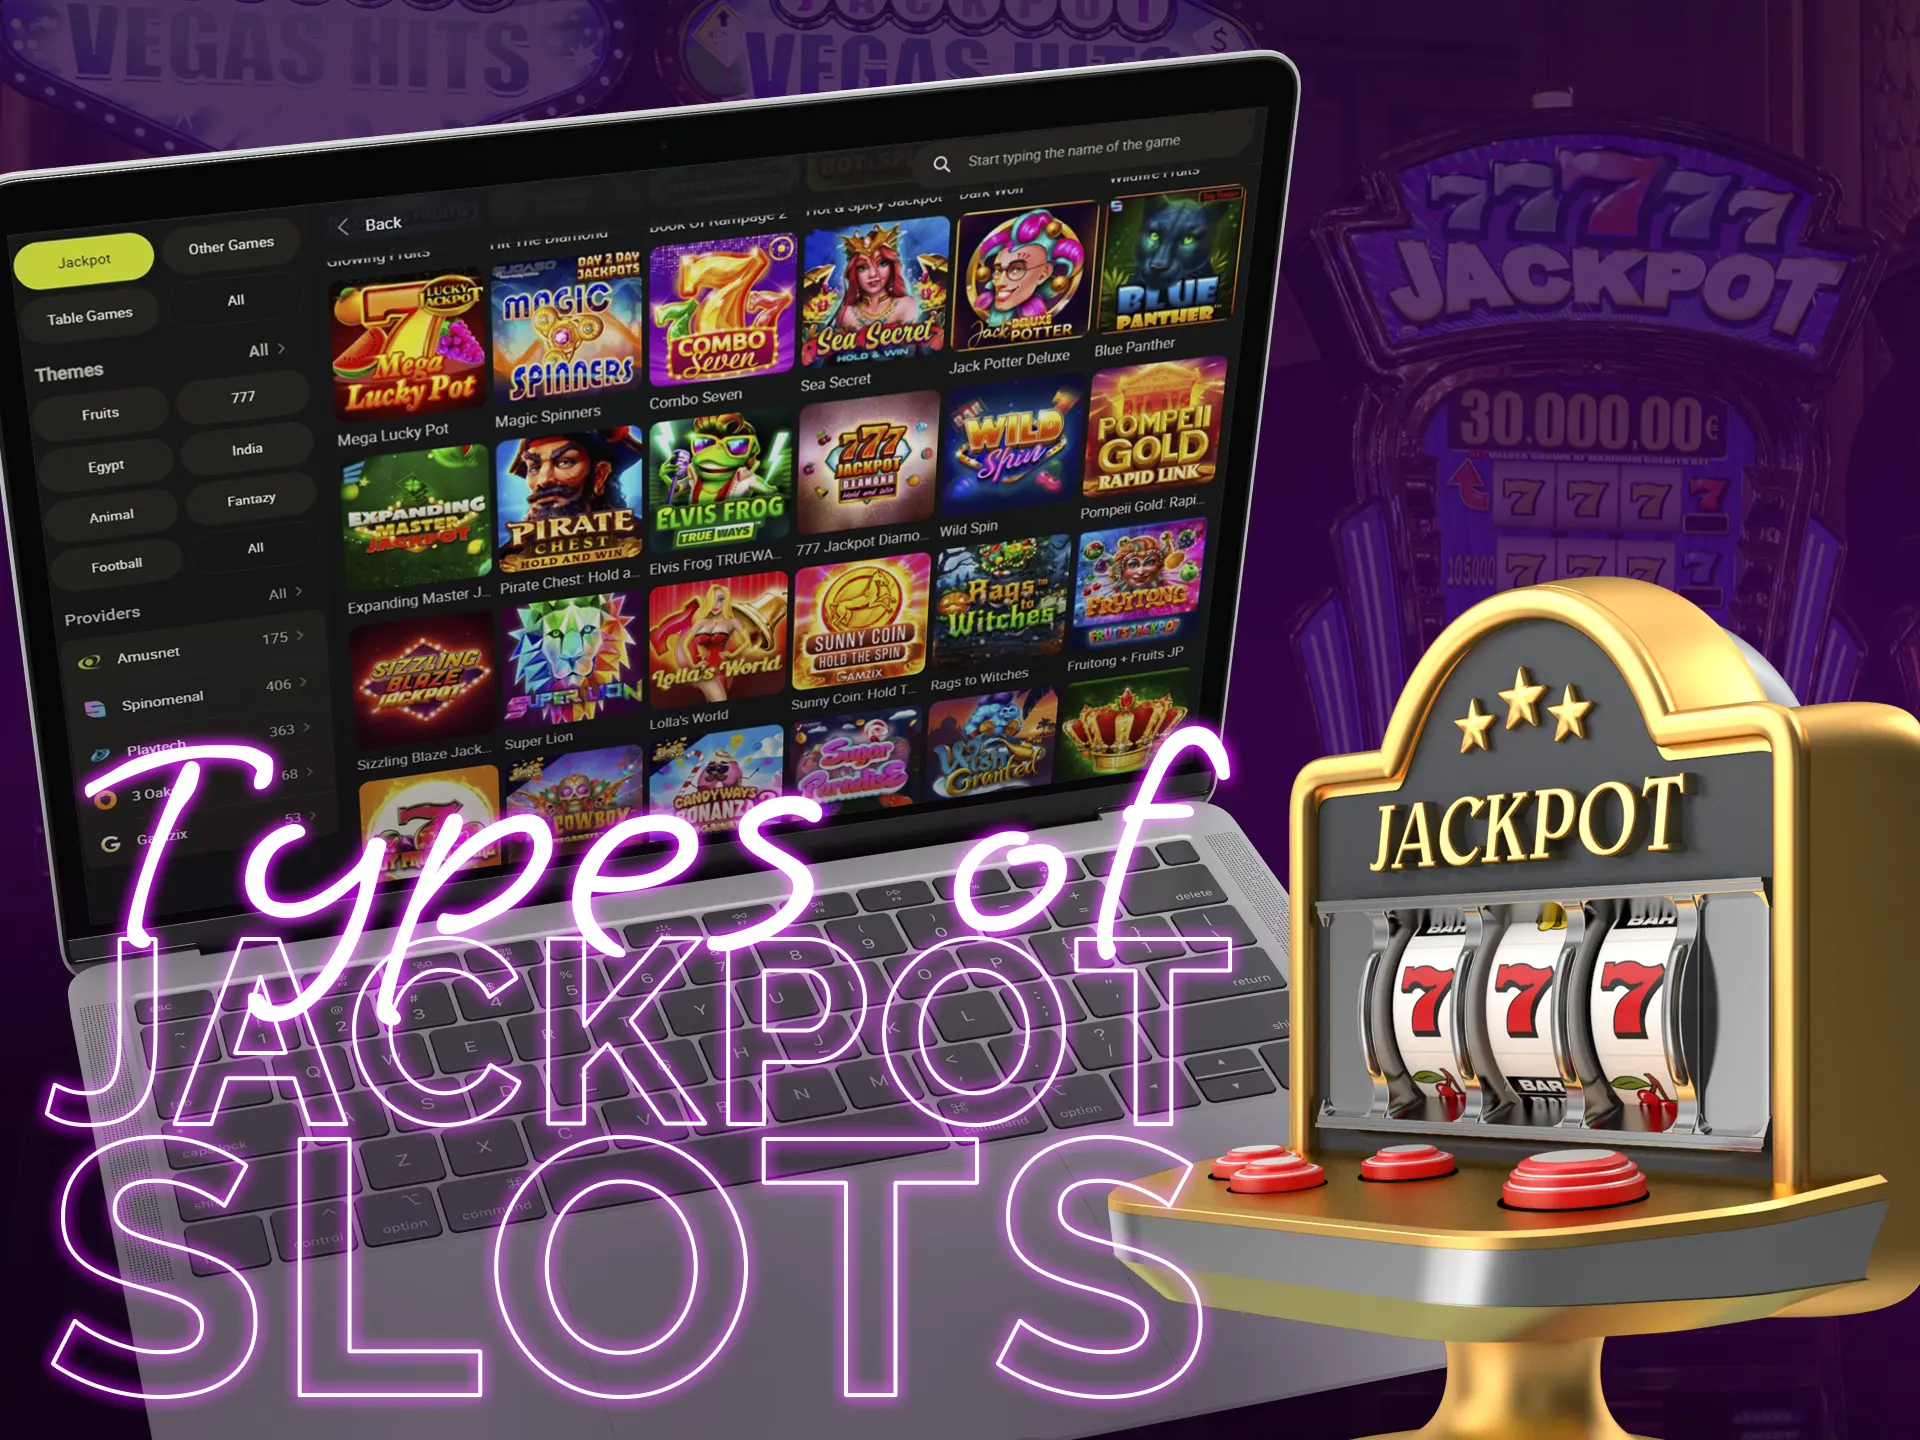 Get information about what kind of jackpot has a selected slot can be found in its description.